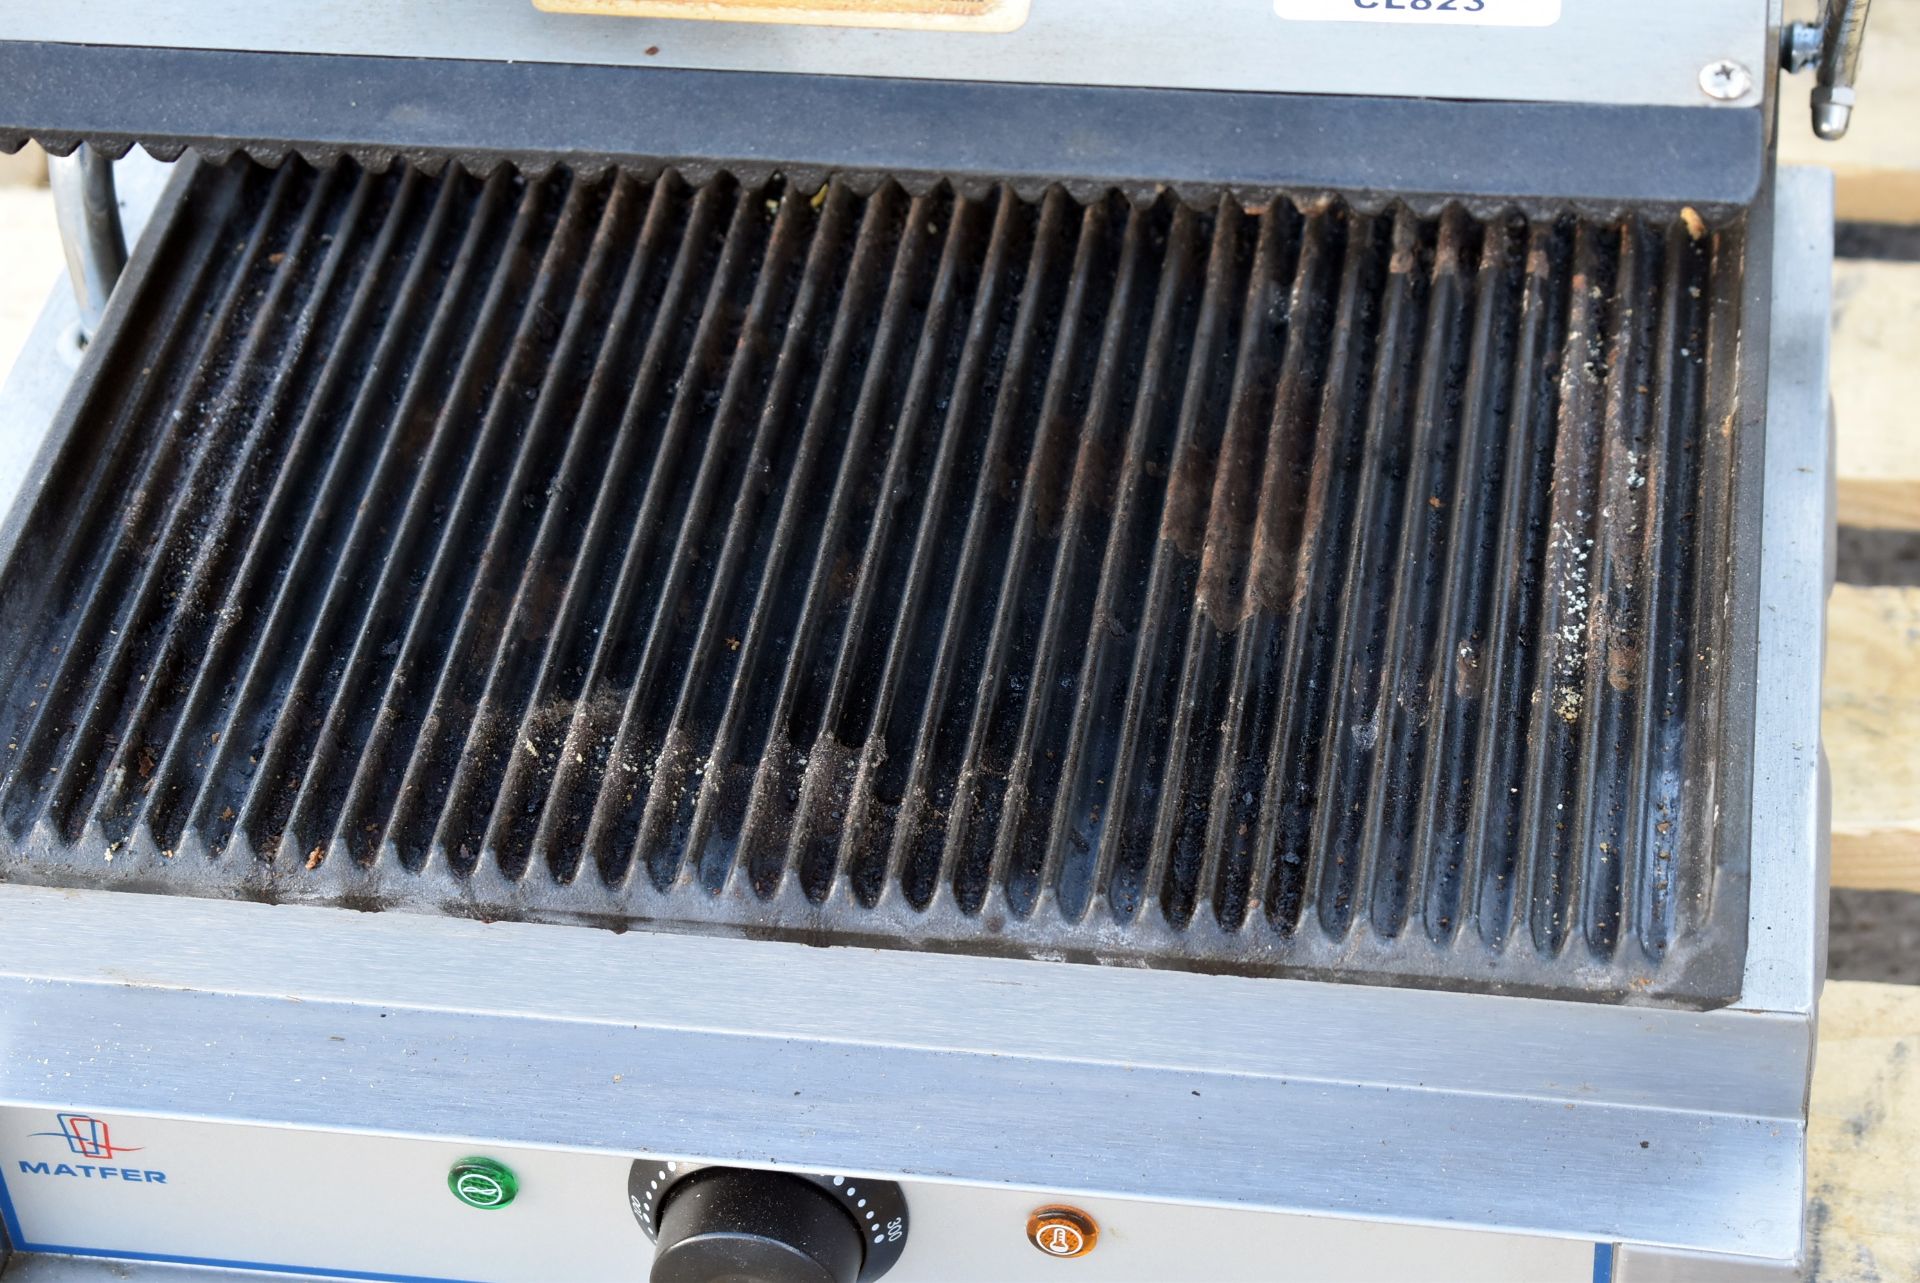 1 x Matfer GH-811PK 2200W Contact Grill - Image 3 of 7